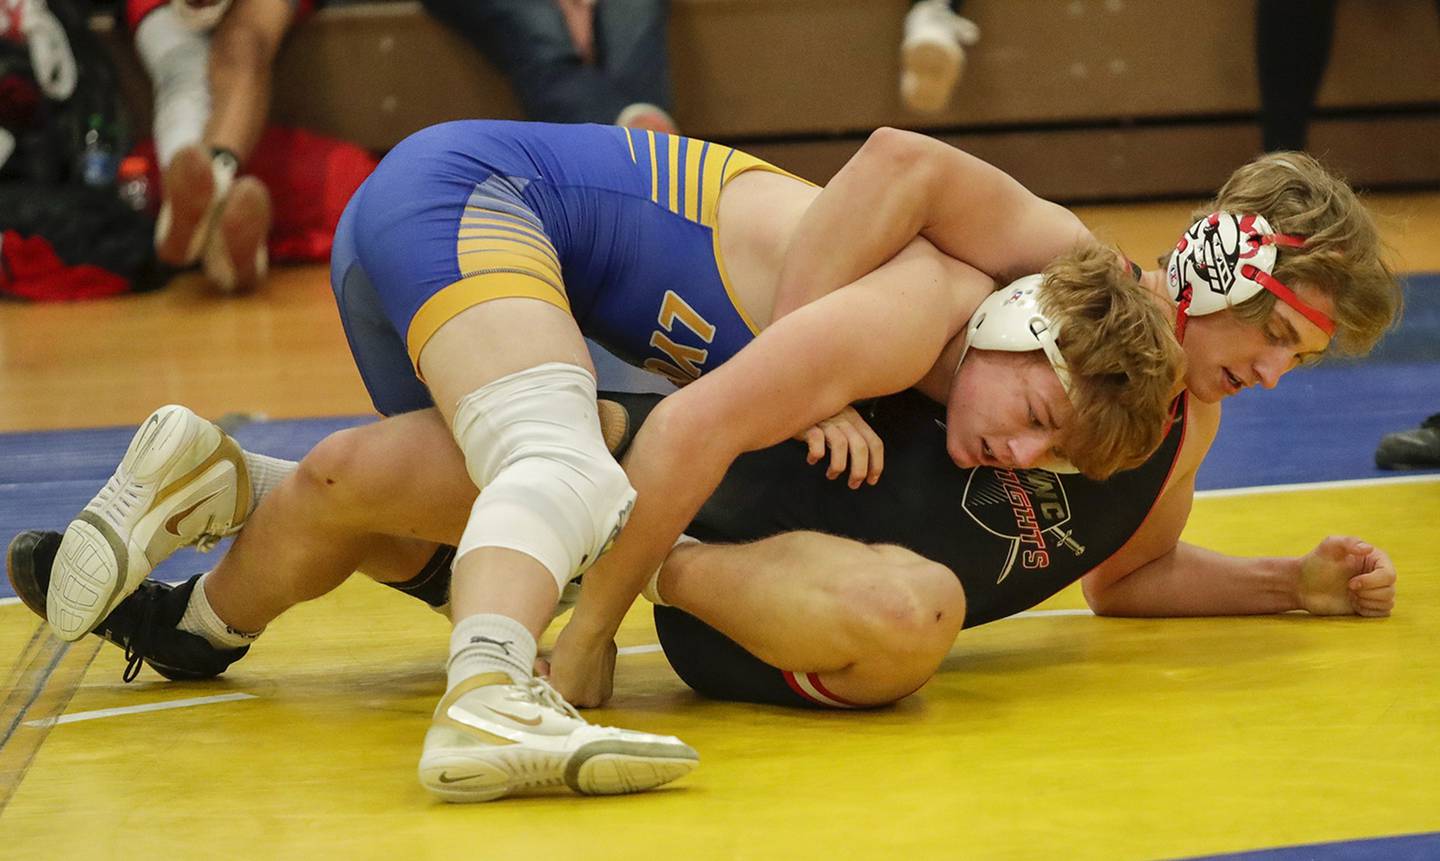 Lyons Township’s Cooper King, left, wrestles against Lincoln-Way Central’s Dominick Danno in a 195-pound match during the Lyons mega duals in La Grange on Saturday, Dec. 10, 2022.